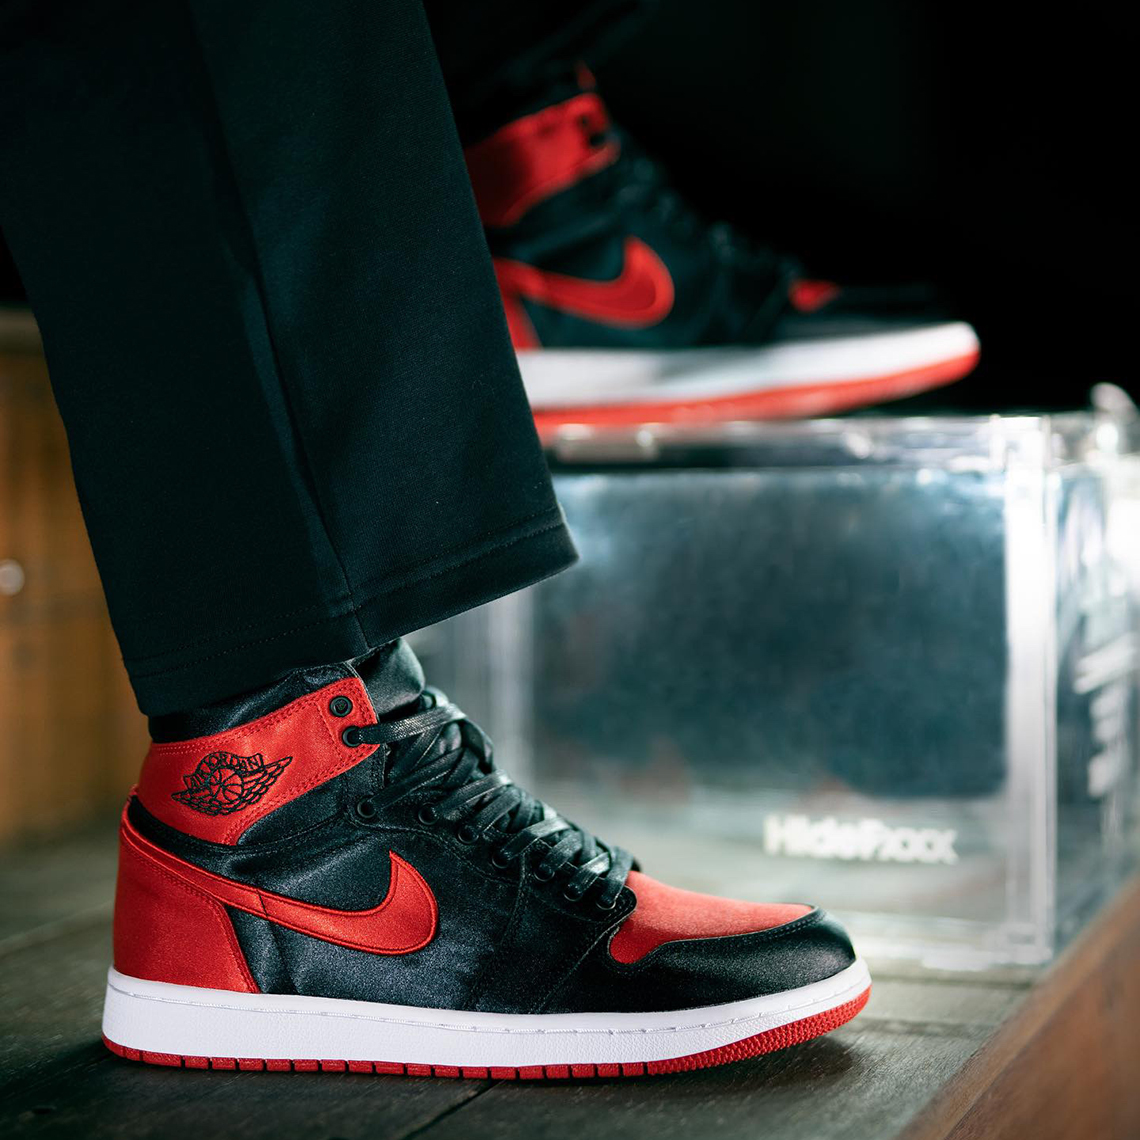 The Air Jordan 1 High OG 'Satin Bred' is one of the rarest birds in the  sneakverse – and it's back